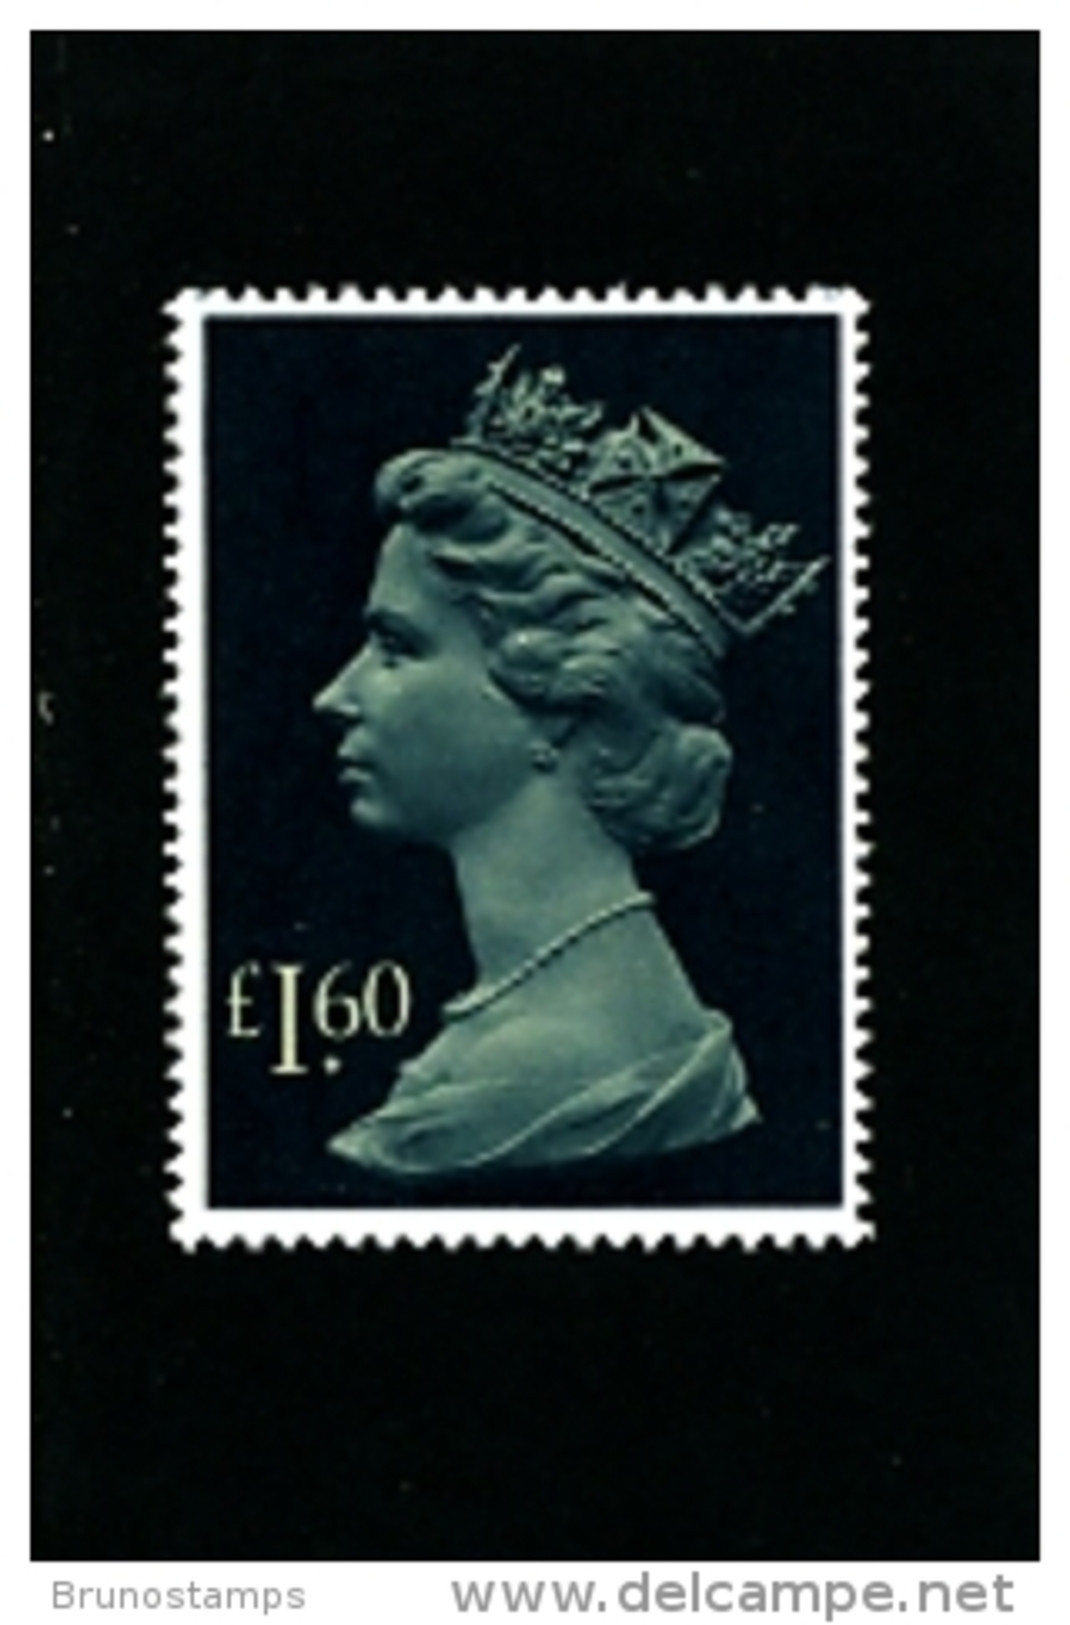 GREAT BRITAIN - 1987  £ 1.60  PARCEL  HIGH VALUE  MINT NH - Neufs